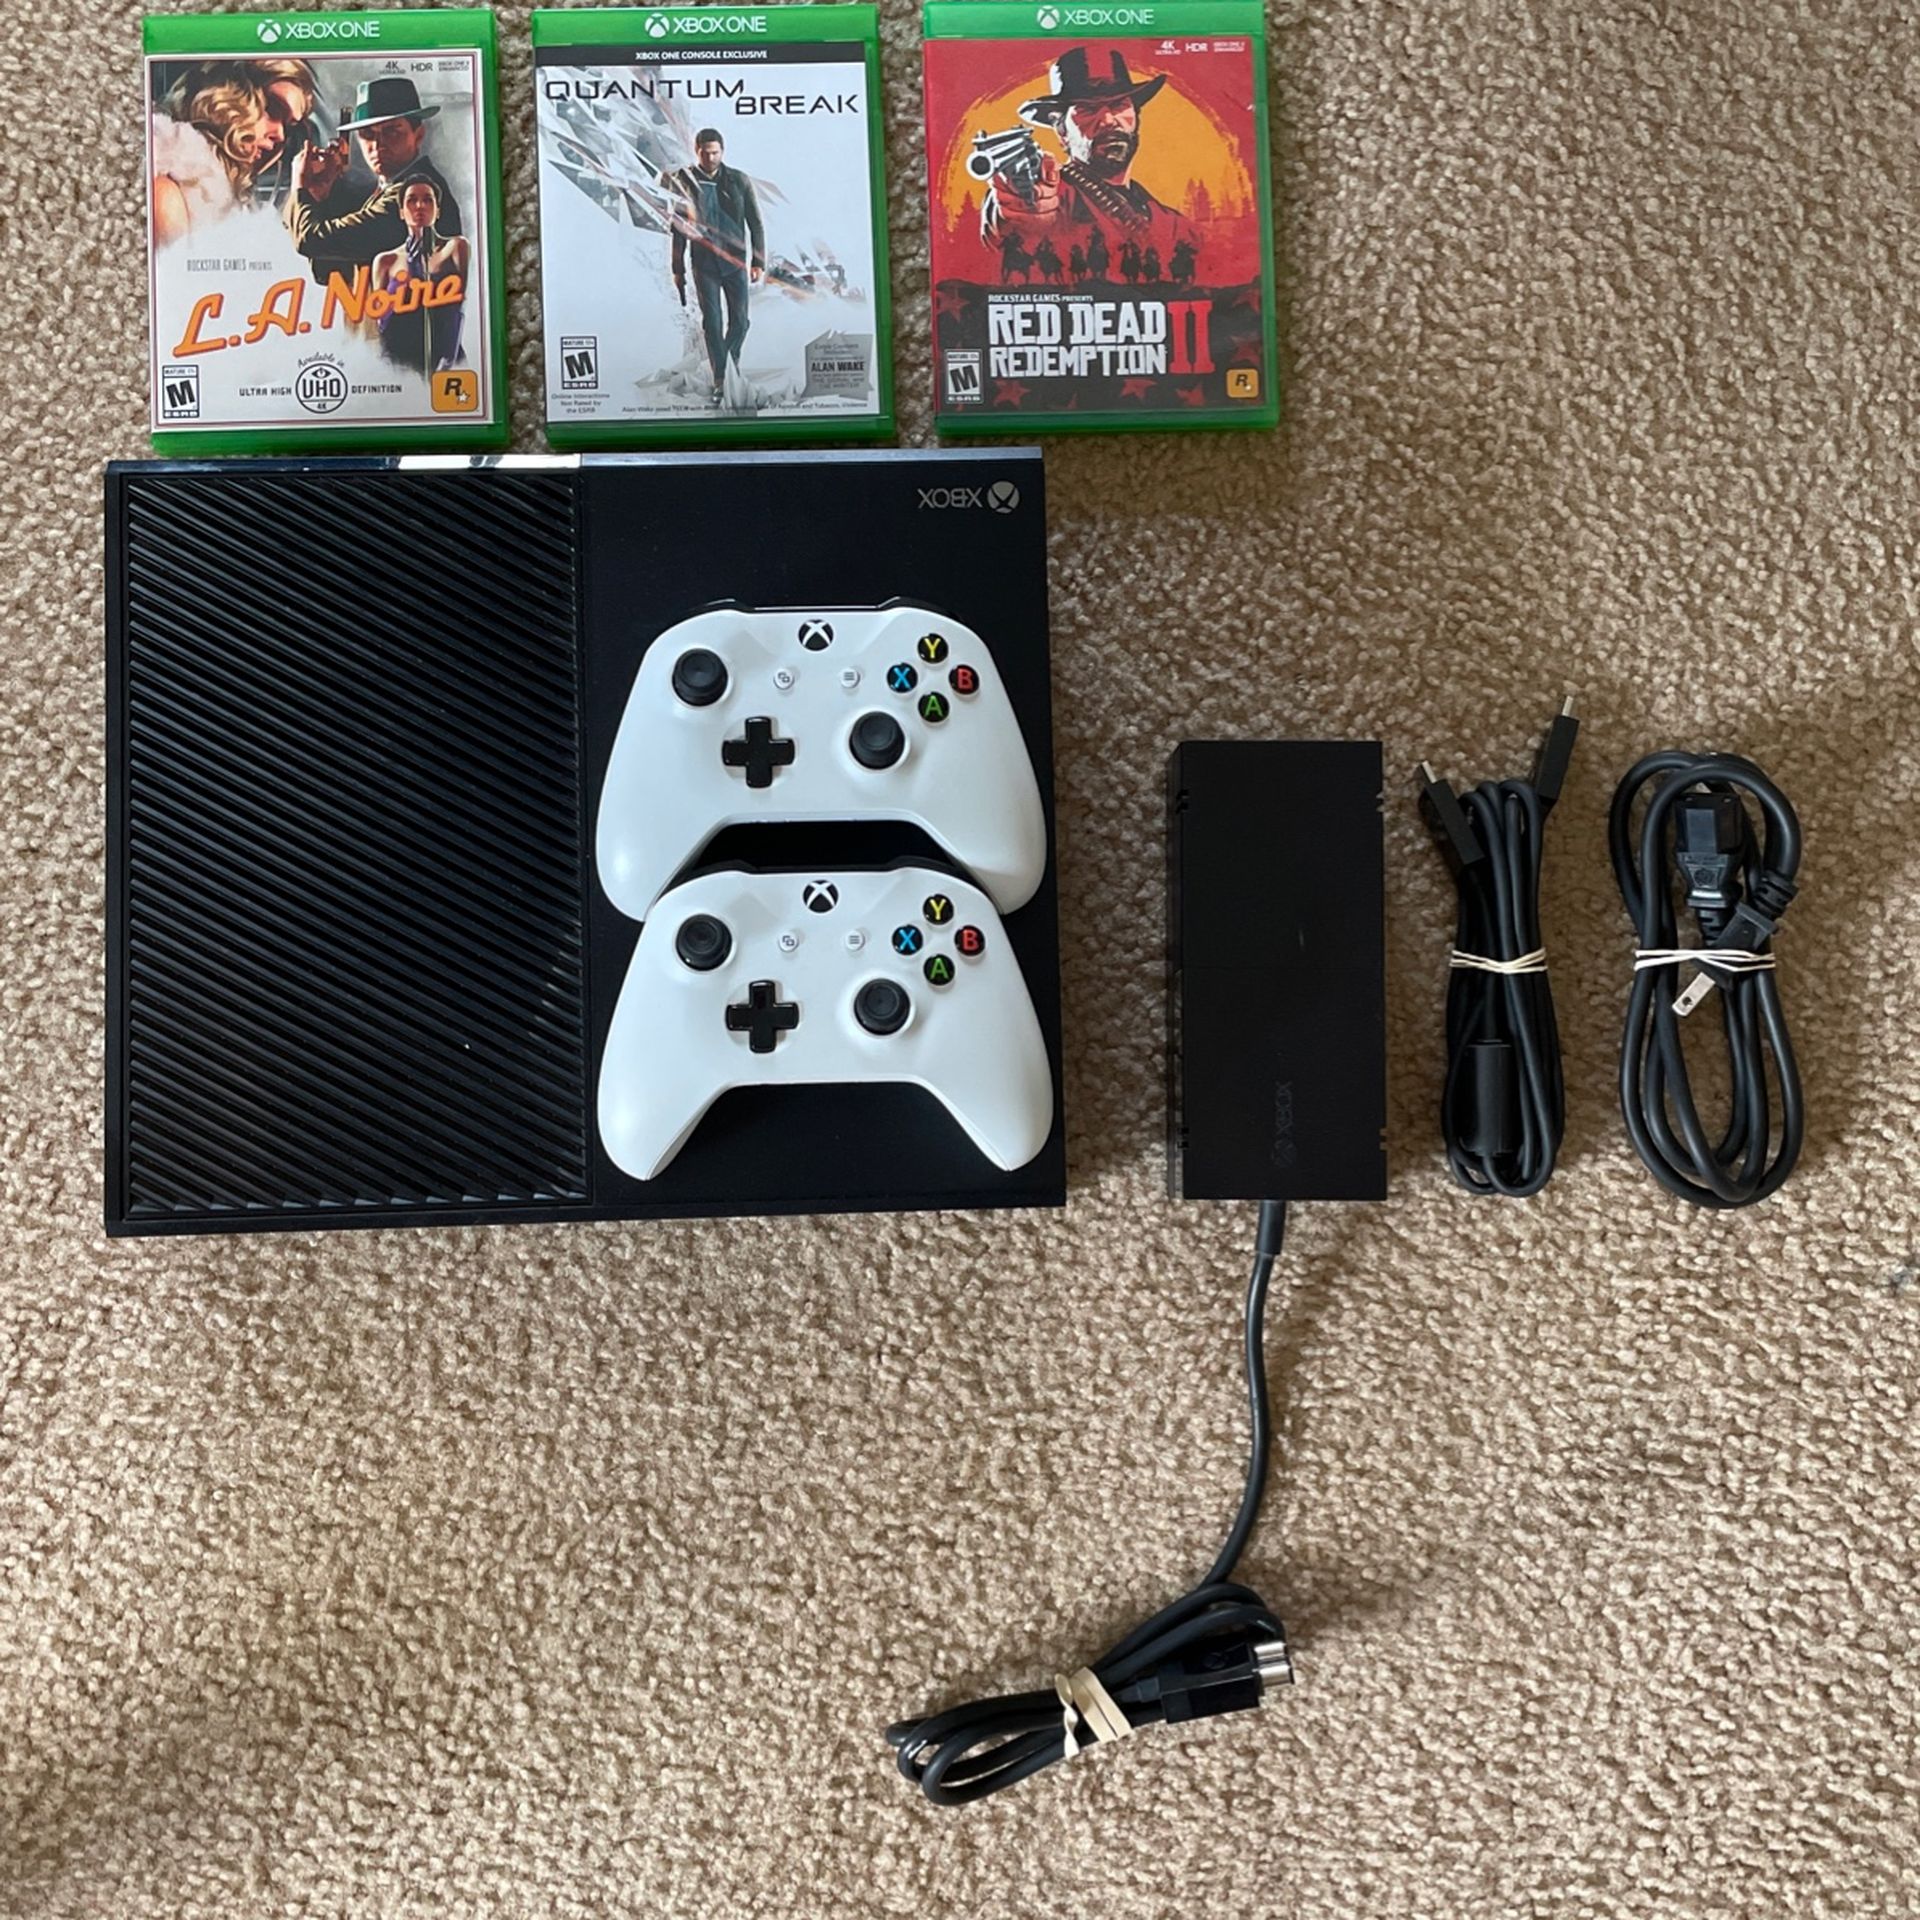 Xbox One (1TB) + Games Included